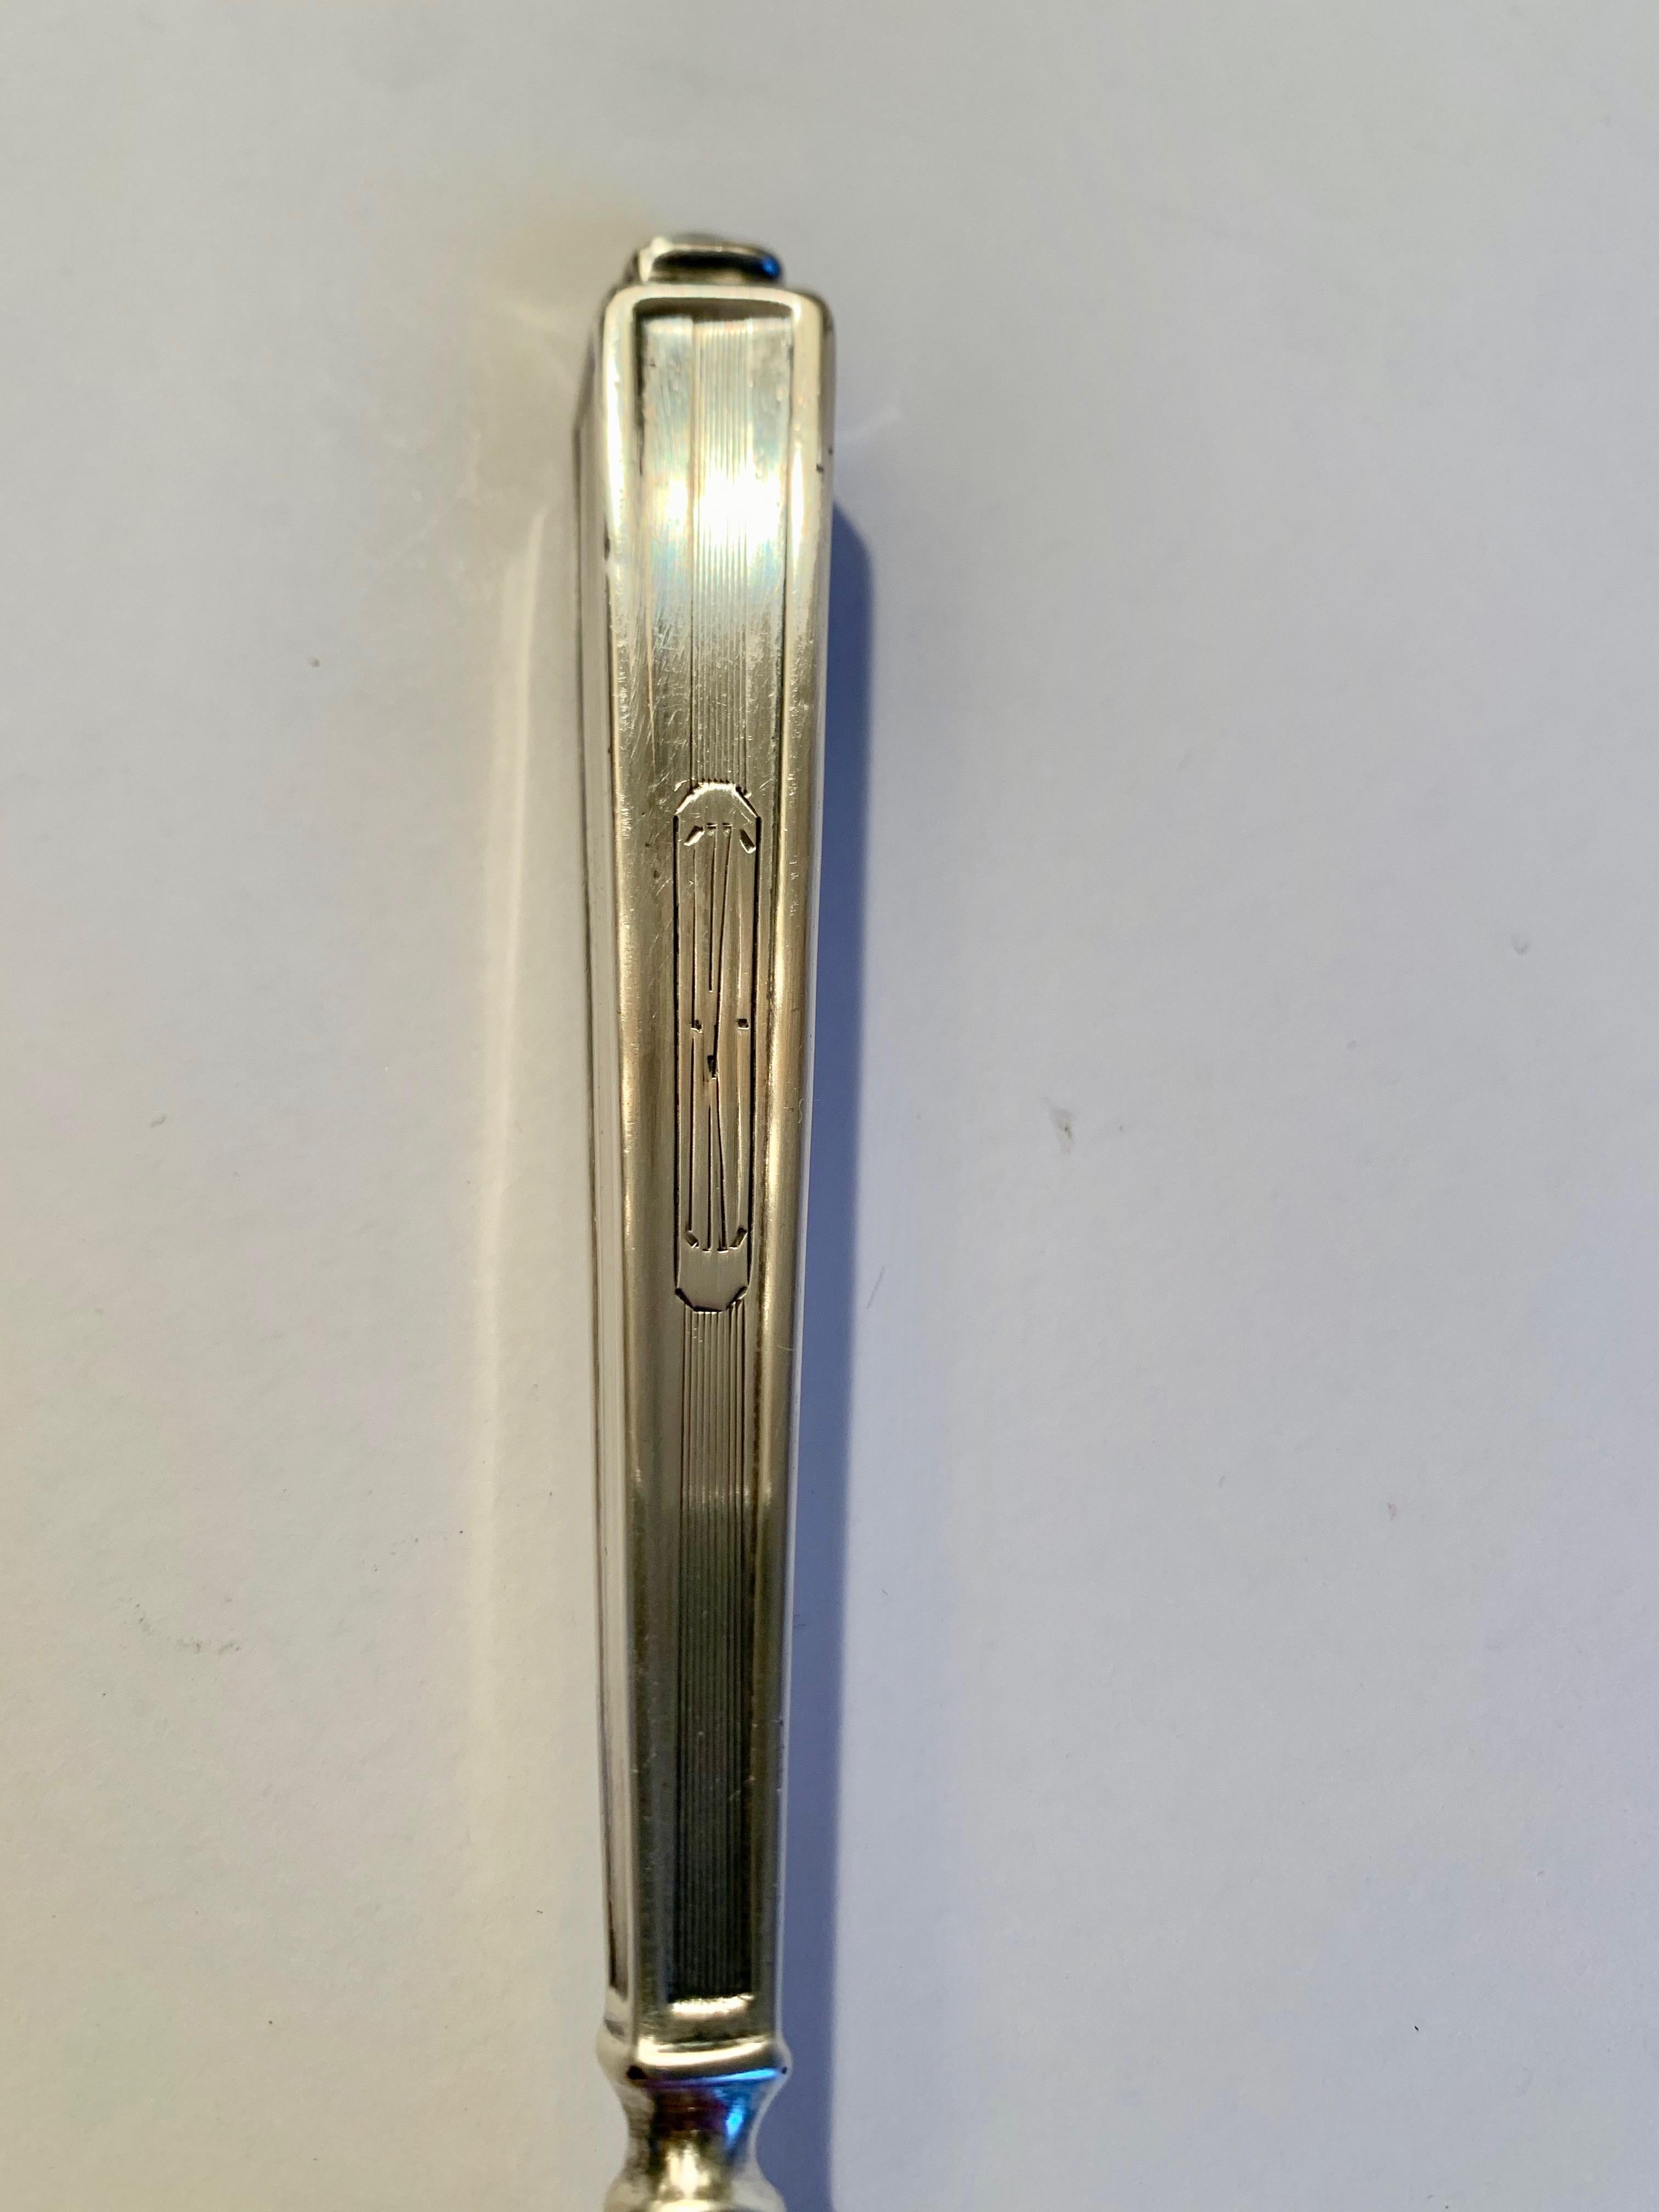 Art Deco shoe horn. The handle is sterling (not stamped). The horn portion of the shoe horn is silver plate.
A handsome piece for the dressing table or closet - unisex and in very good vintage condition